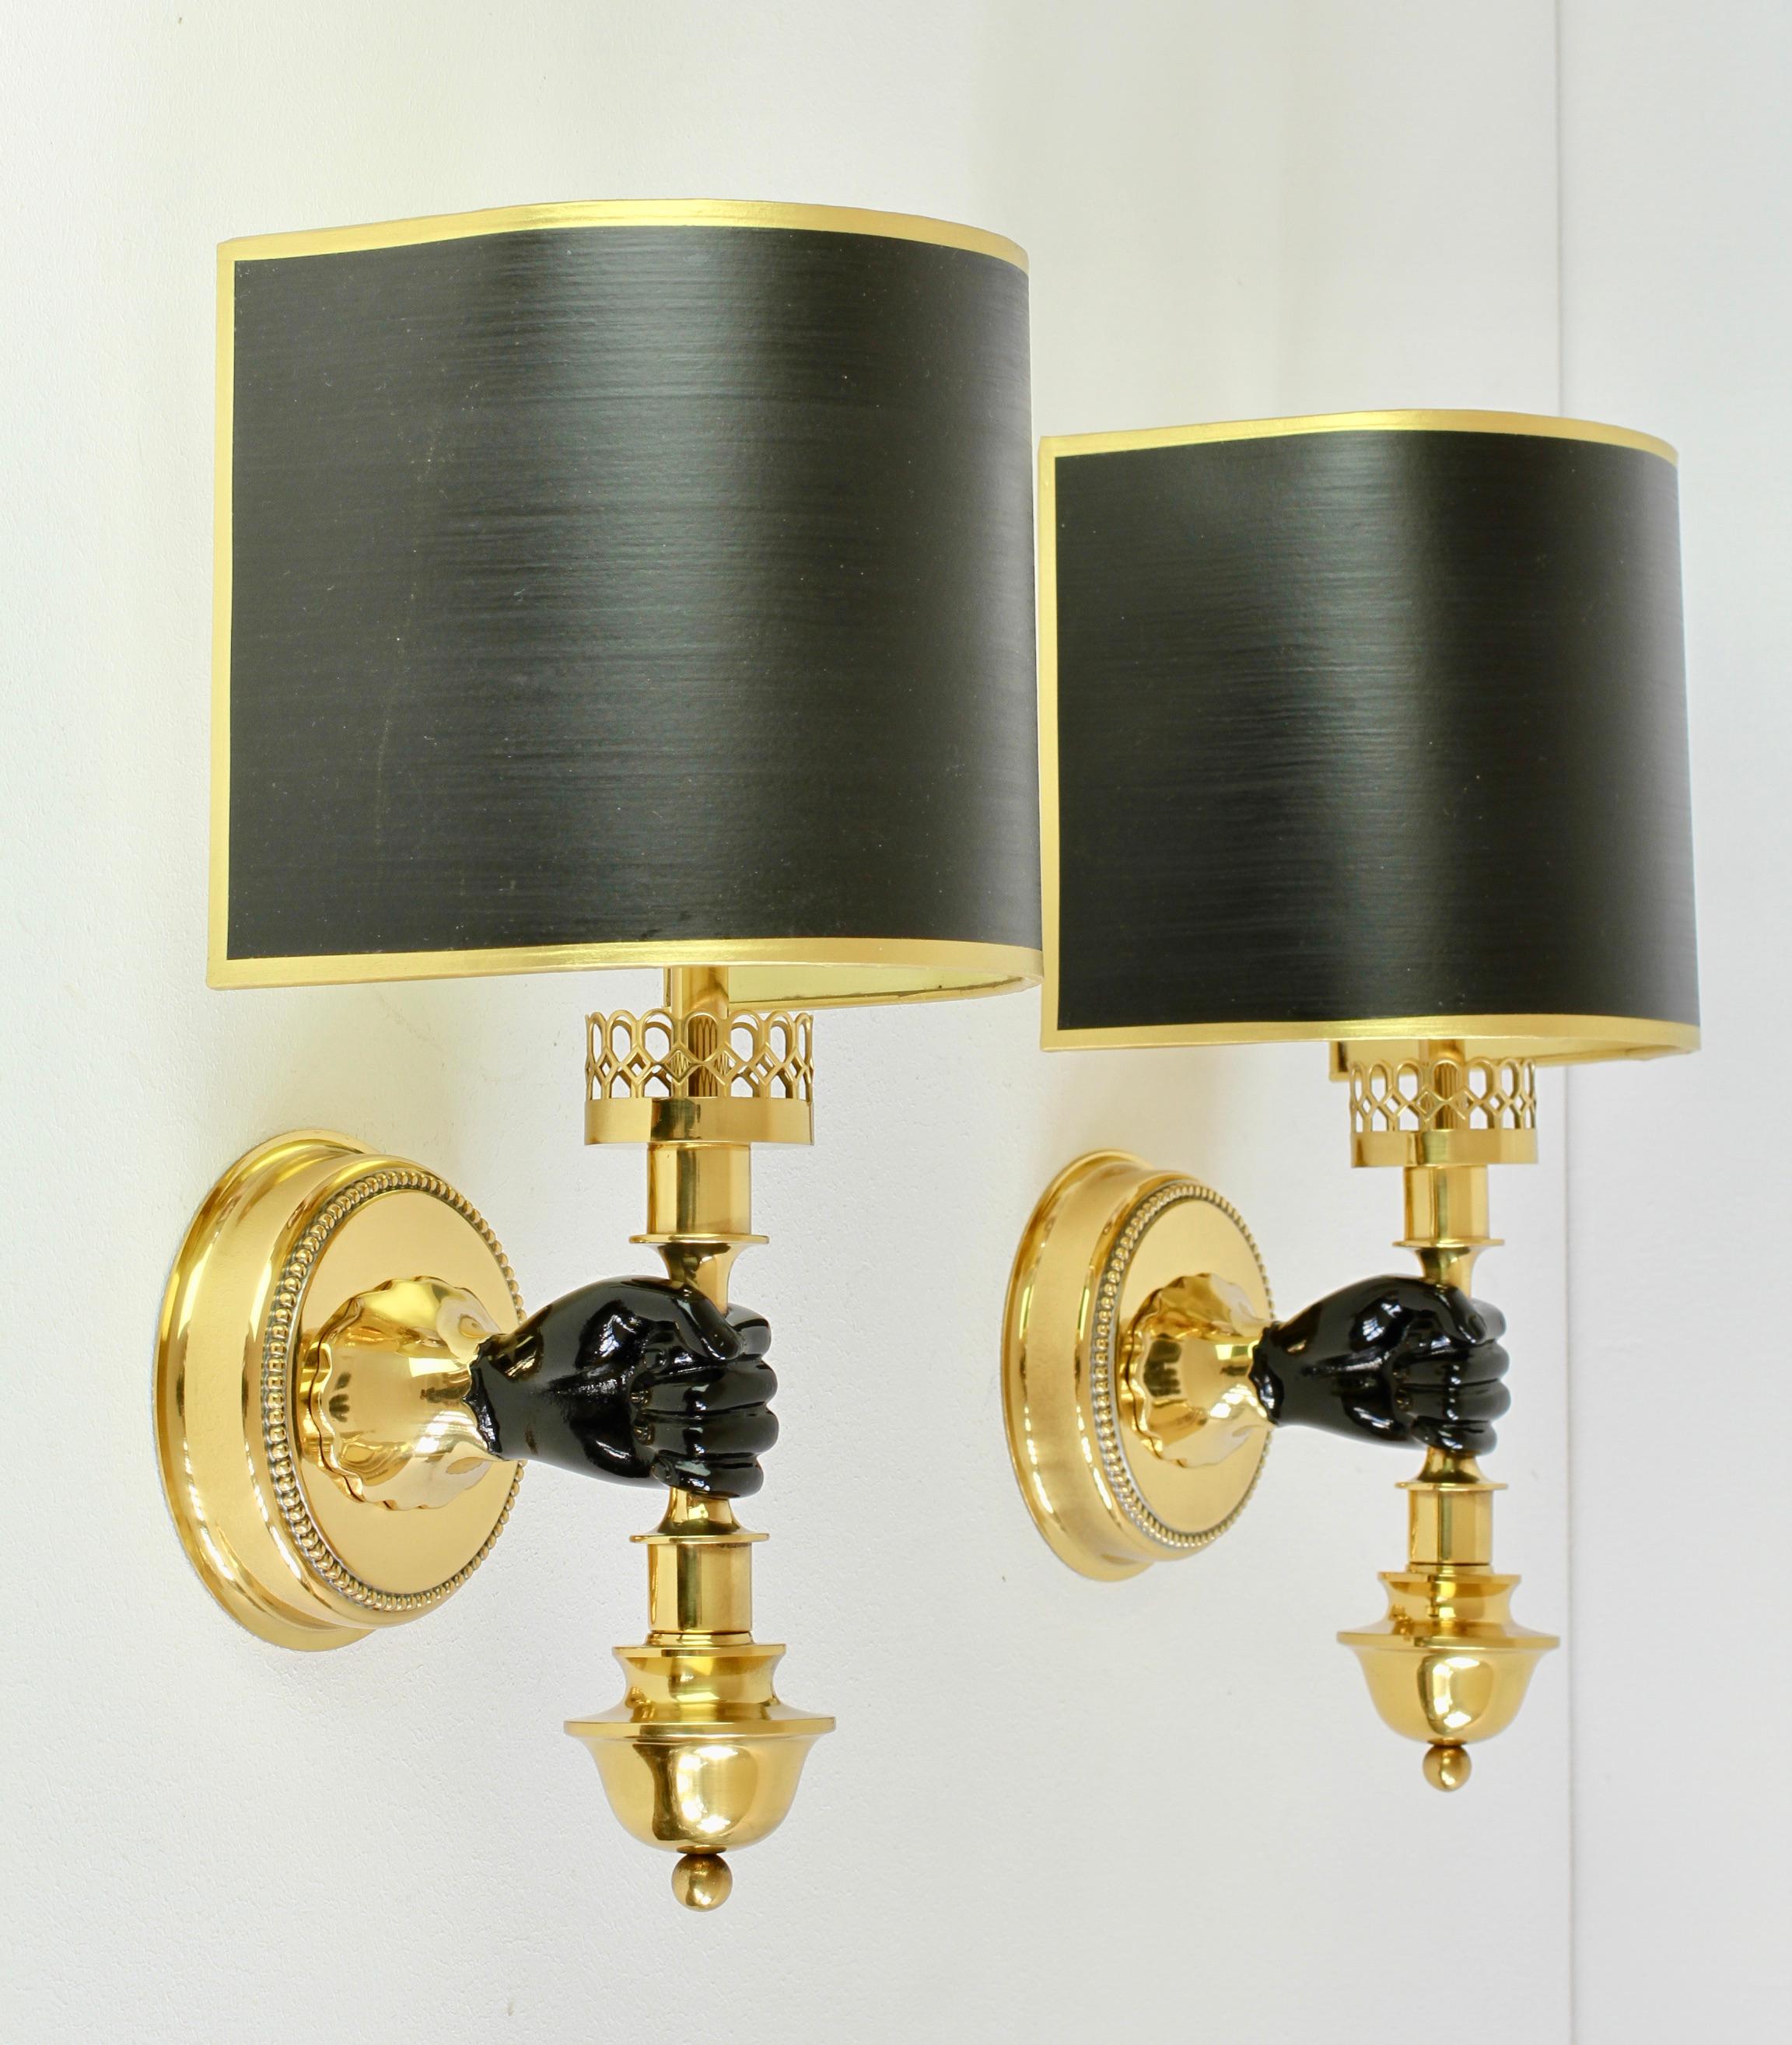 Stunning pair of vintage midcentury wall lights, lamps or sconces in solid cast brass with original black painted gold trim curved shades by the Vereinigten Werkstätten München (Munich) circa 1970s. Beautiful design and incredibly good craftsmanship